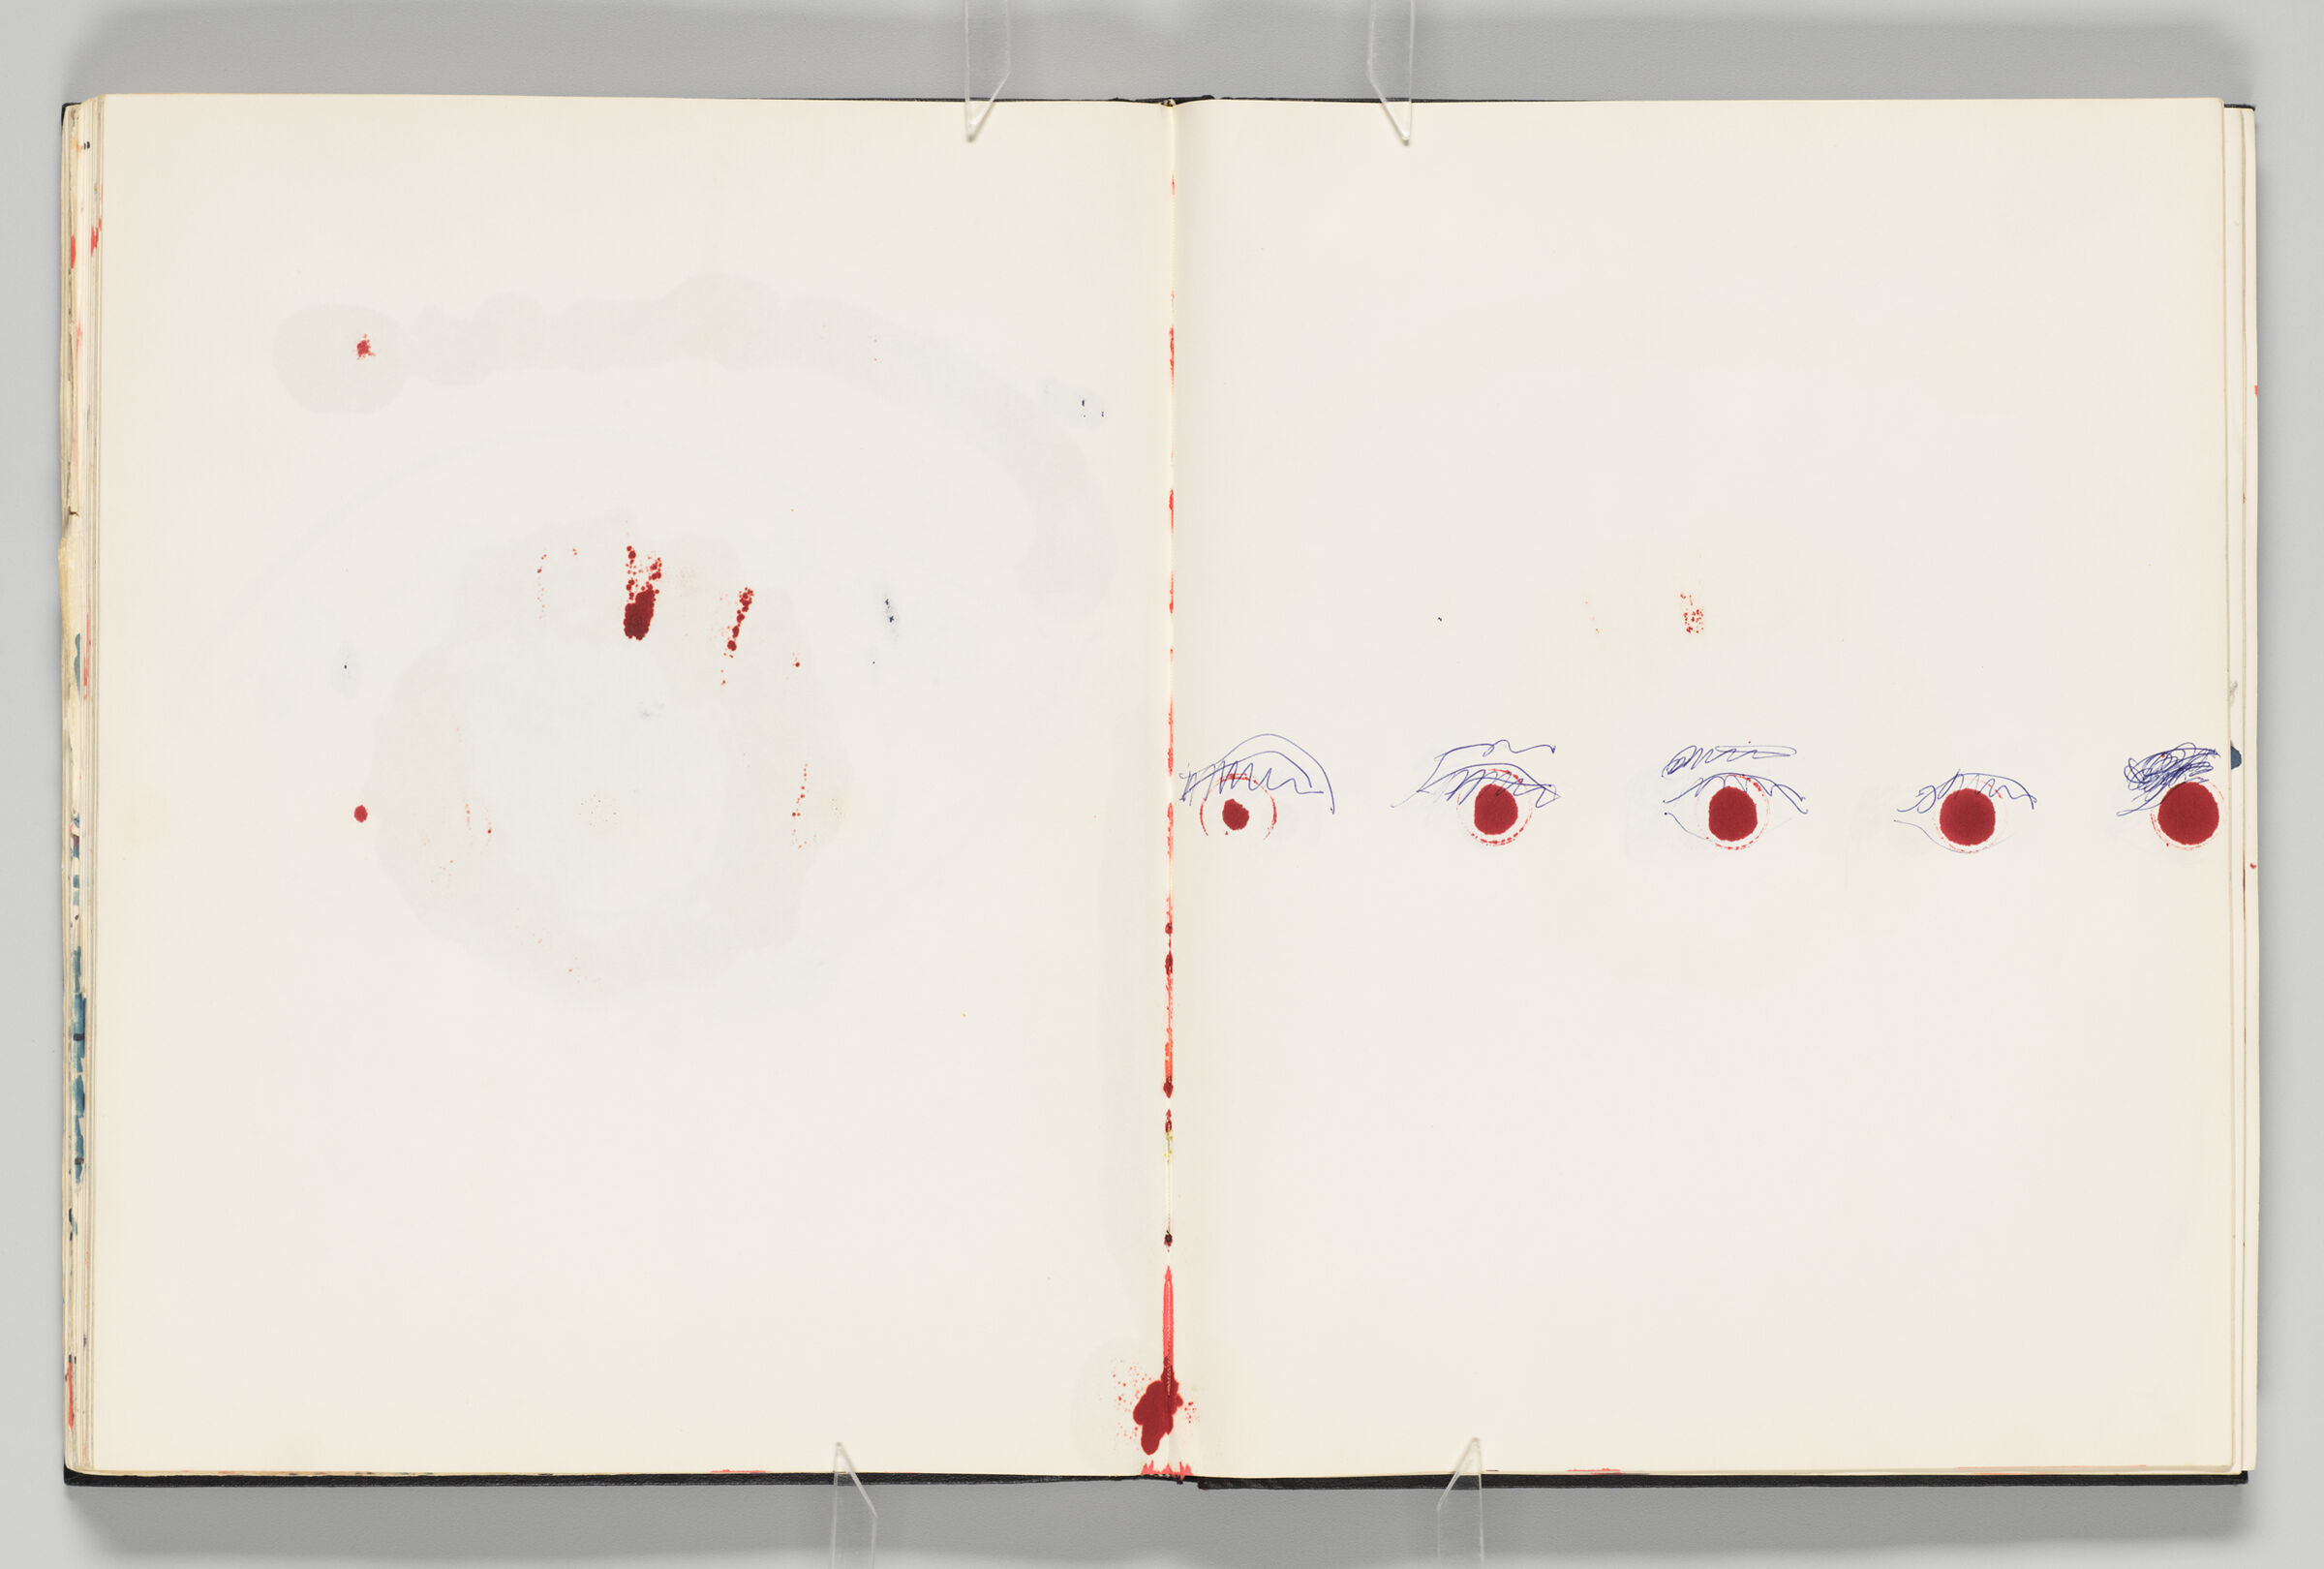 Untitled (Color Transfer From Previous Pages, Left Page); Untitled (Row Of Eyes, Right Page)